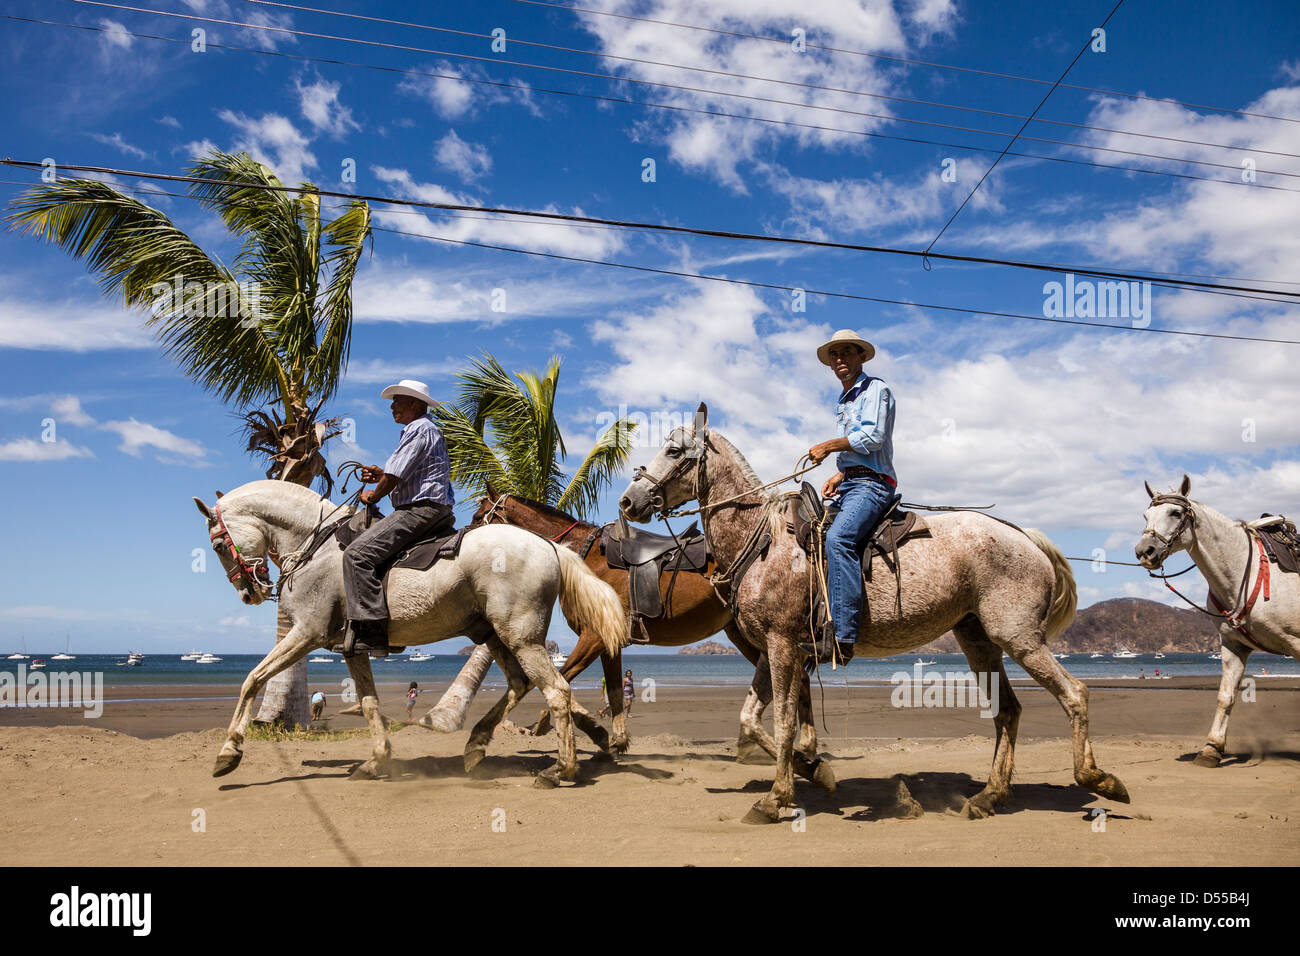 Riding horses on the beach during the Tope de Caballos at Coco Beach, Playas del Coco, Guanacaste, Costa Rica. Stock Photo